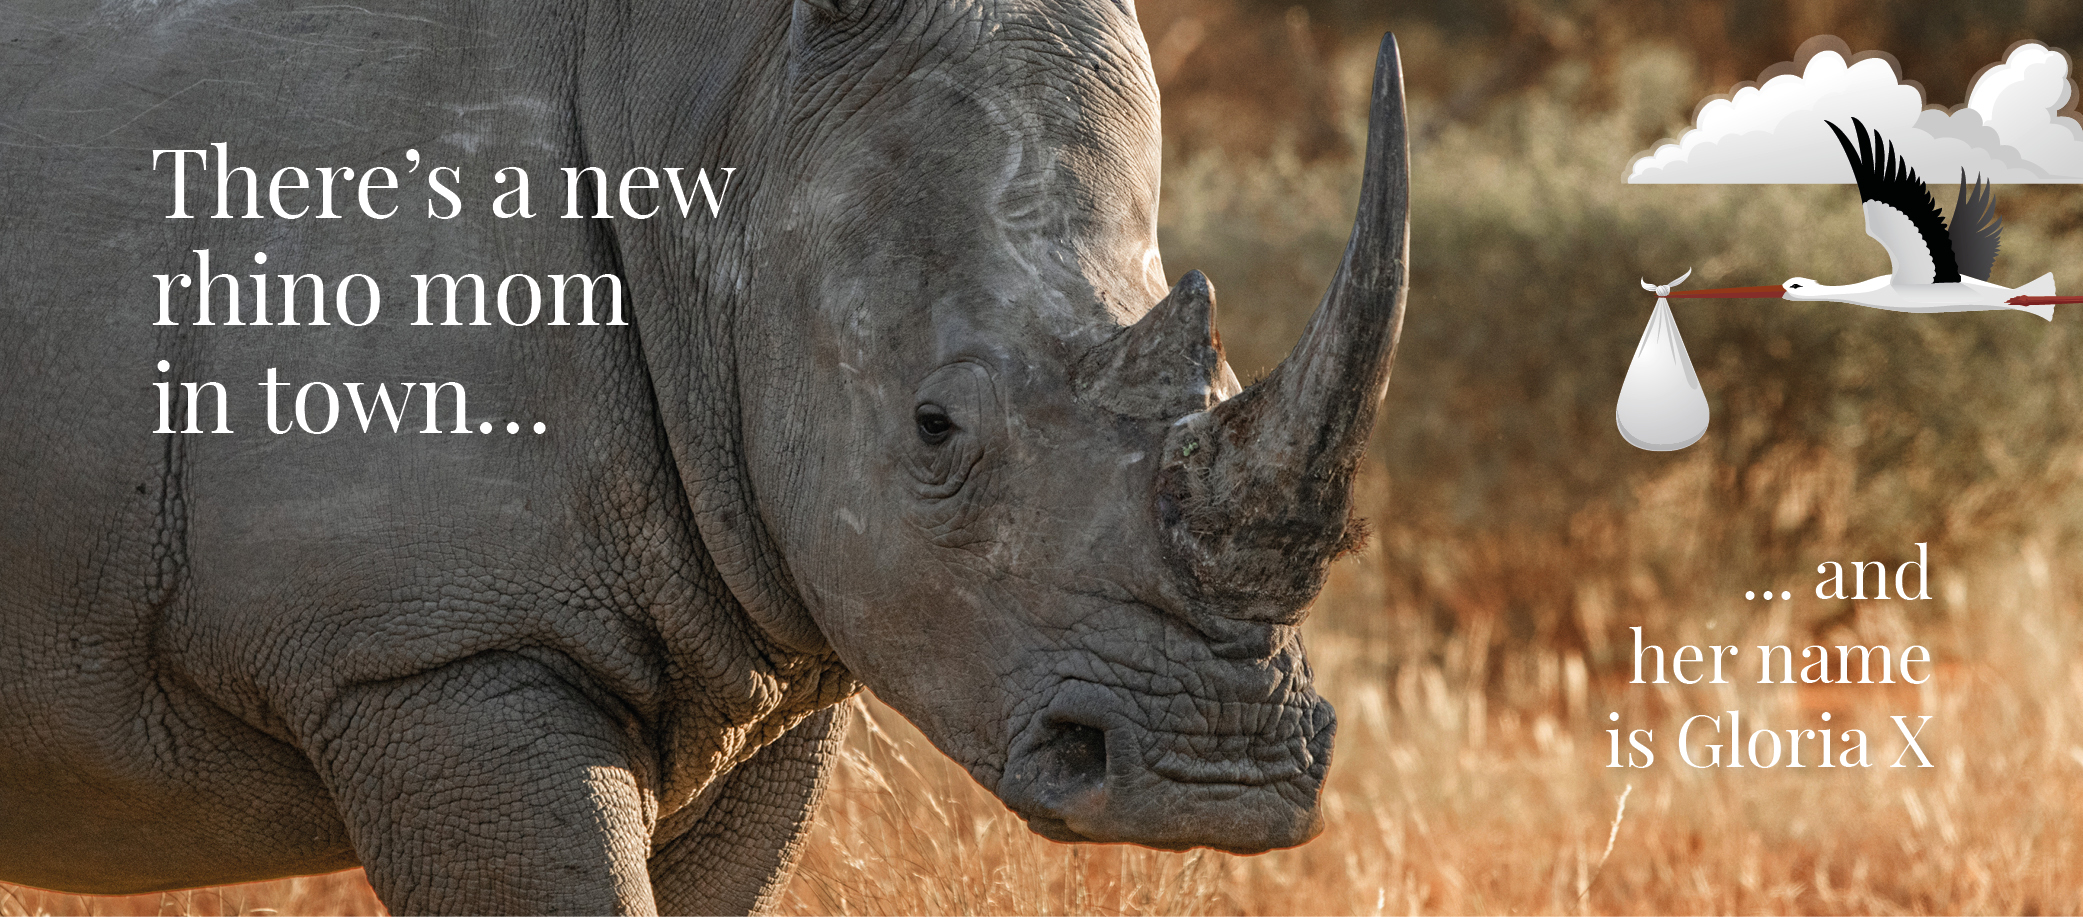 There's a new rhino mom in town, and her name is Gloria X.